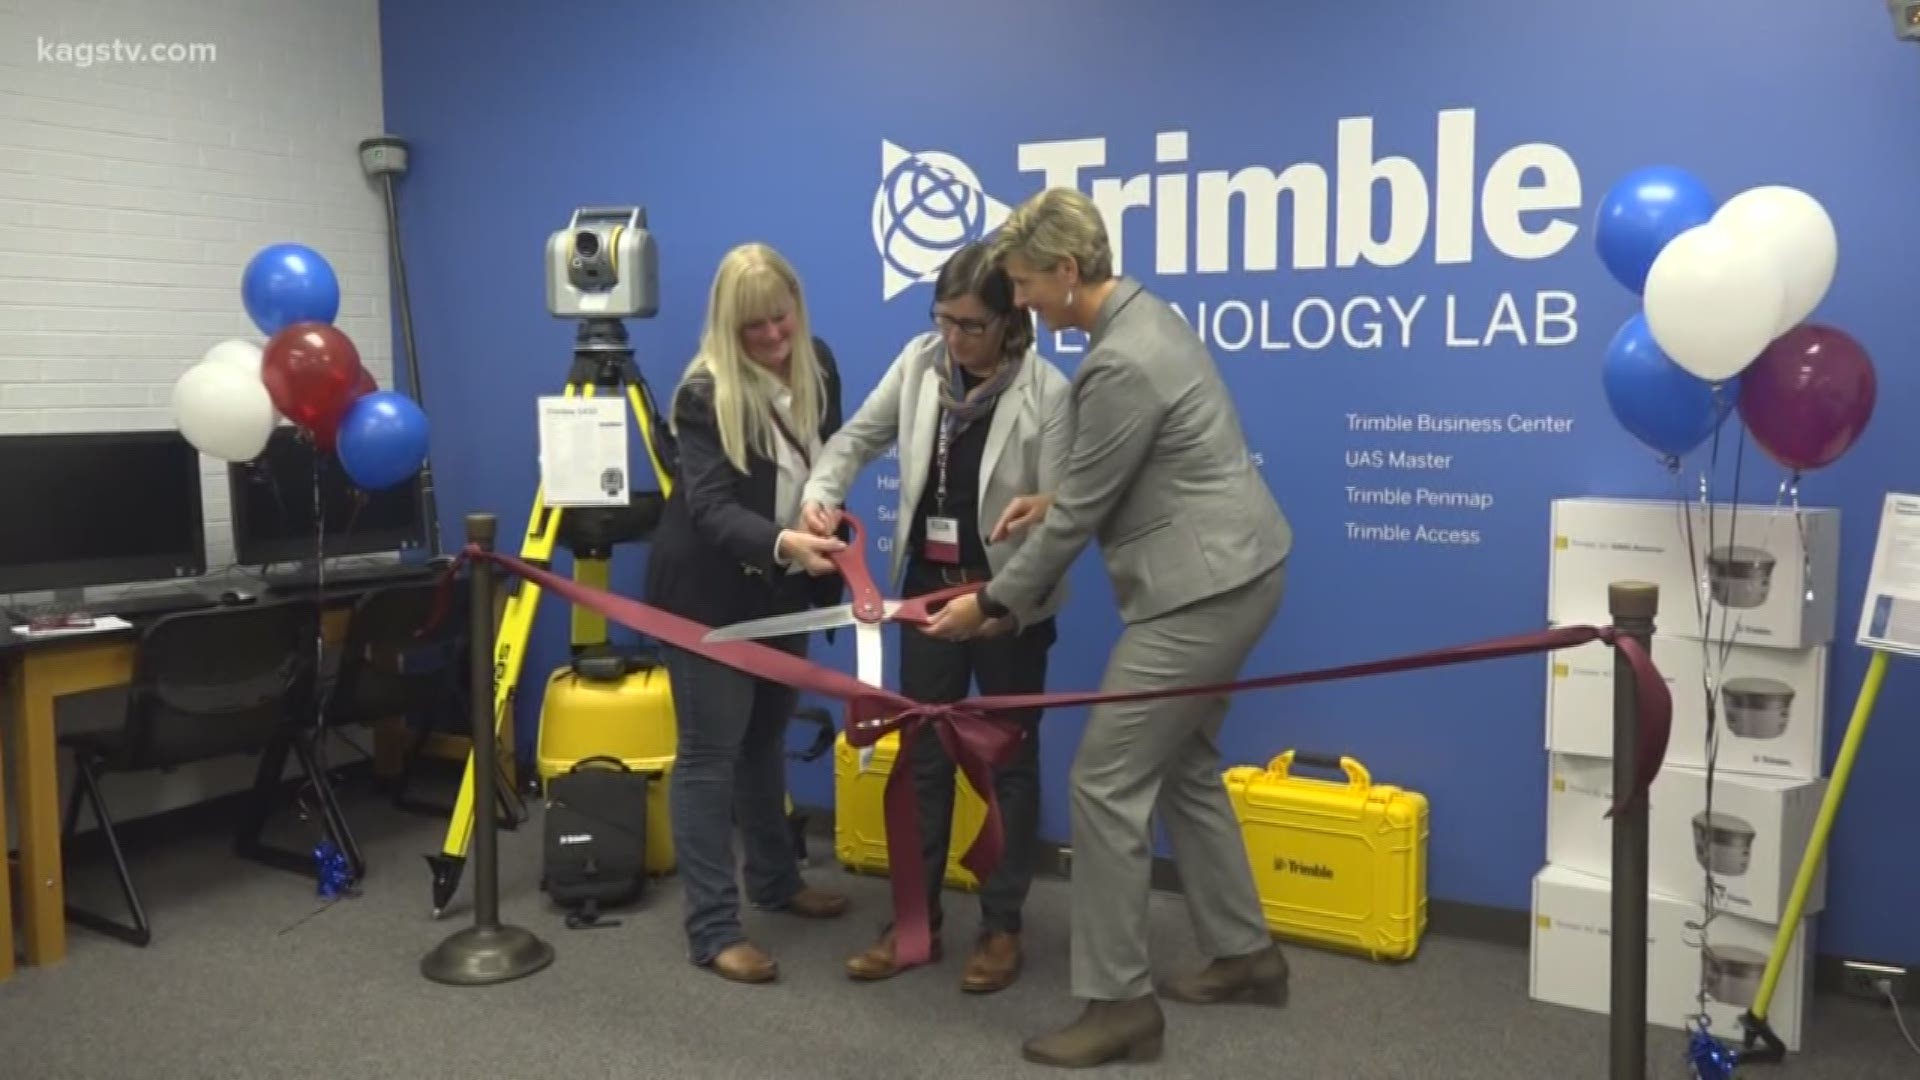 The school held a ribbon cutting of a new technology lab that will help their students and the world beyond the classroom with new software and hardware.